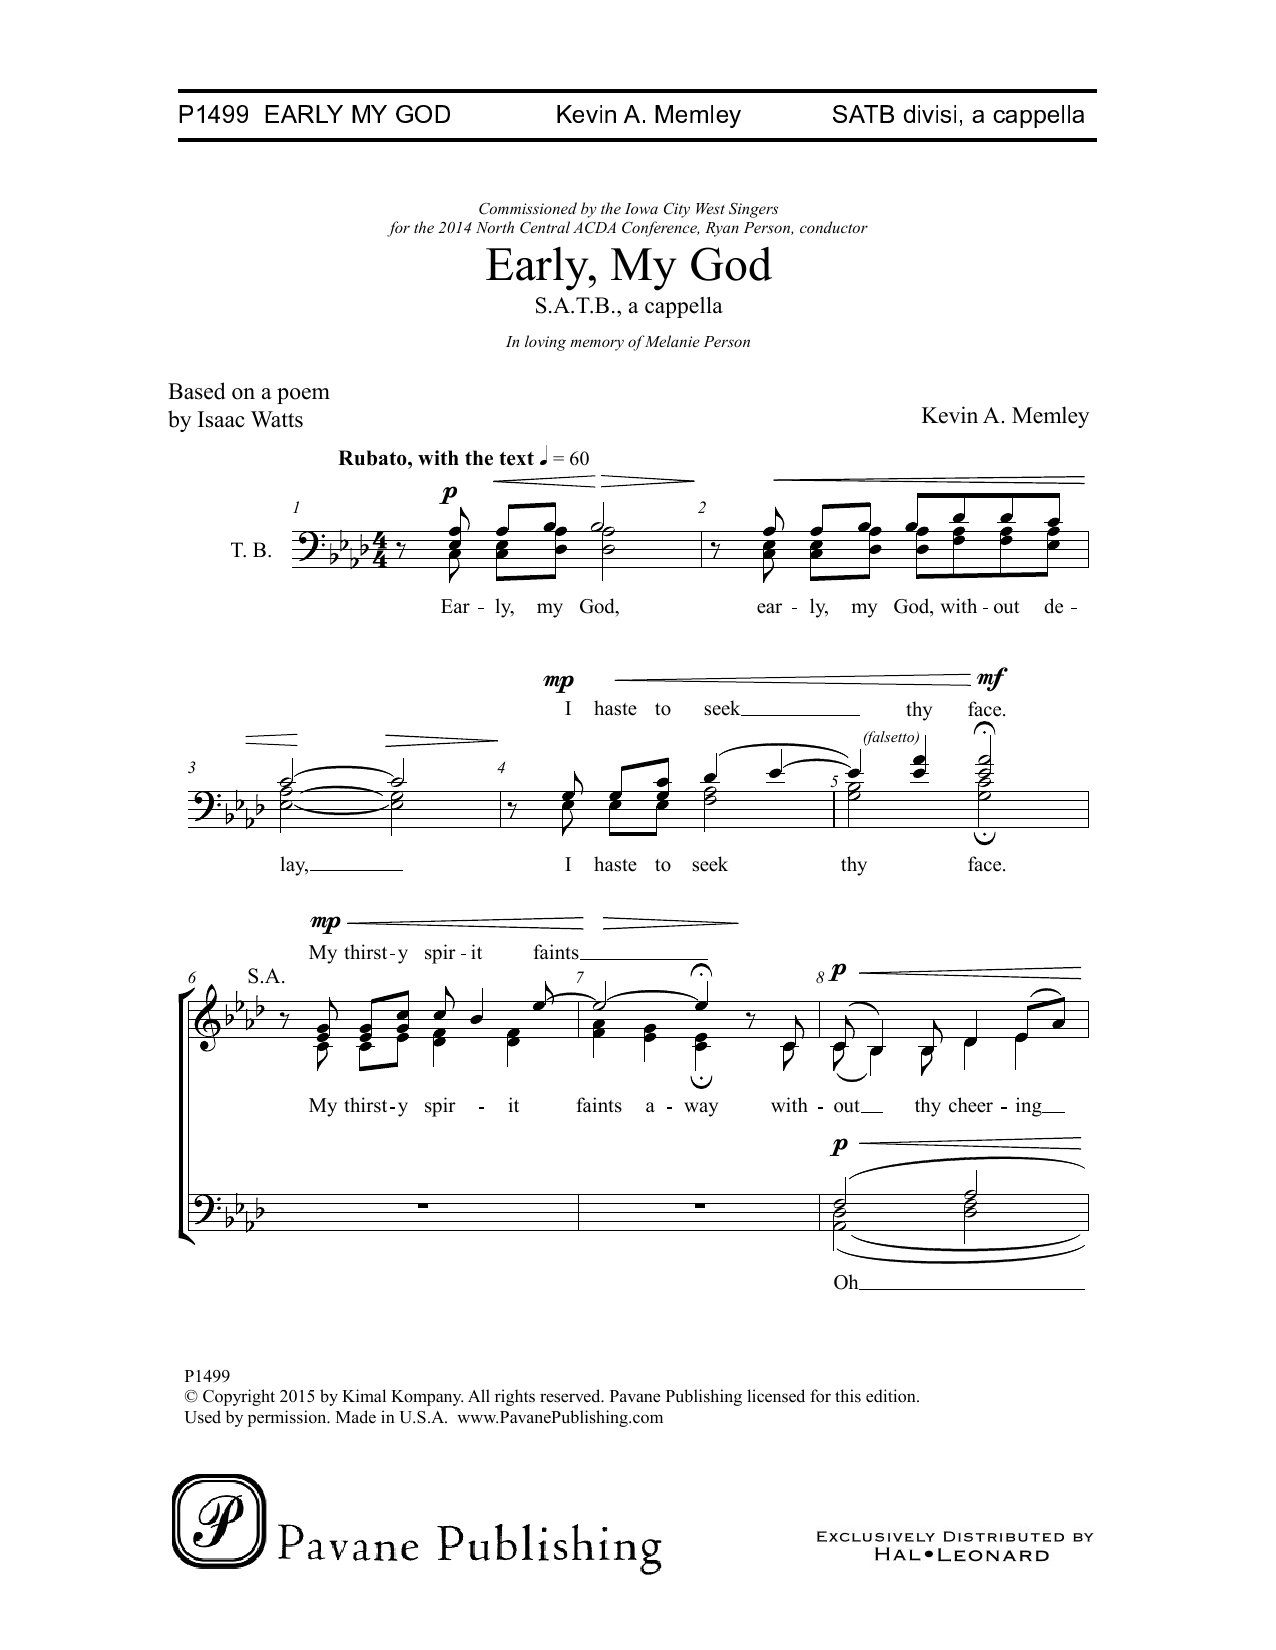 Download Kevin A. Memley Early, My God Sheet Music